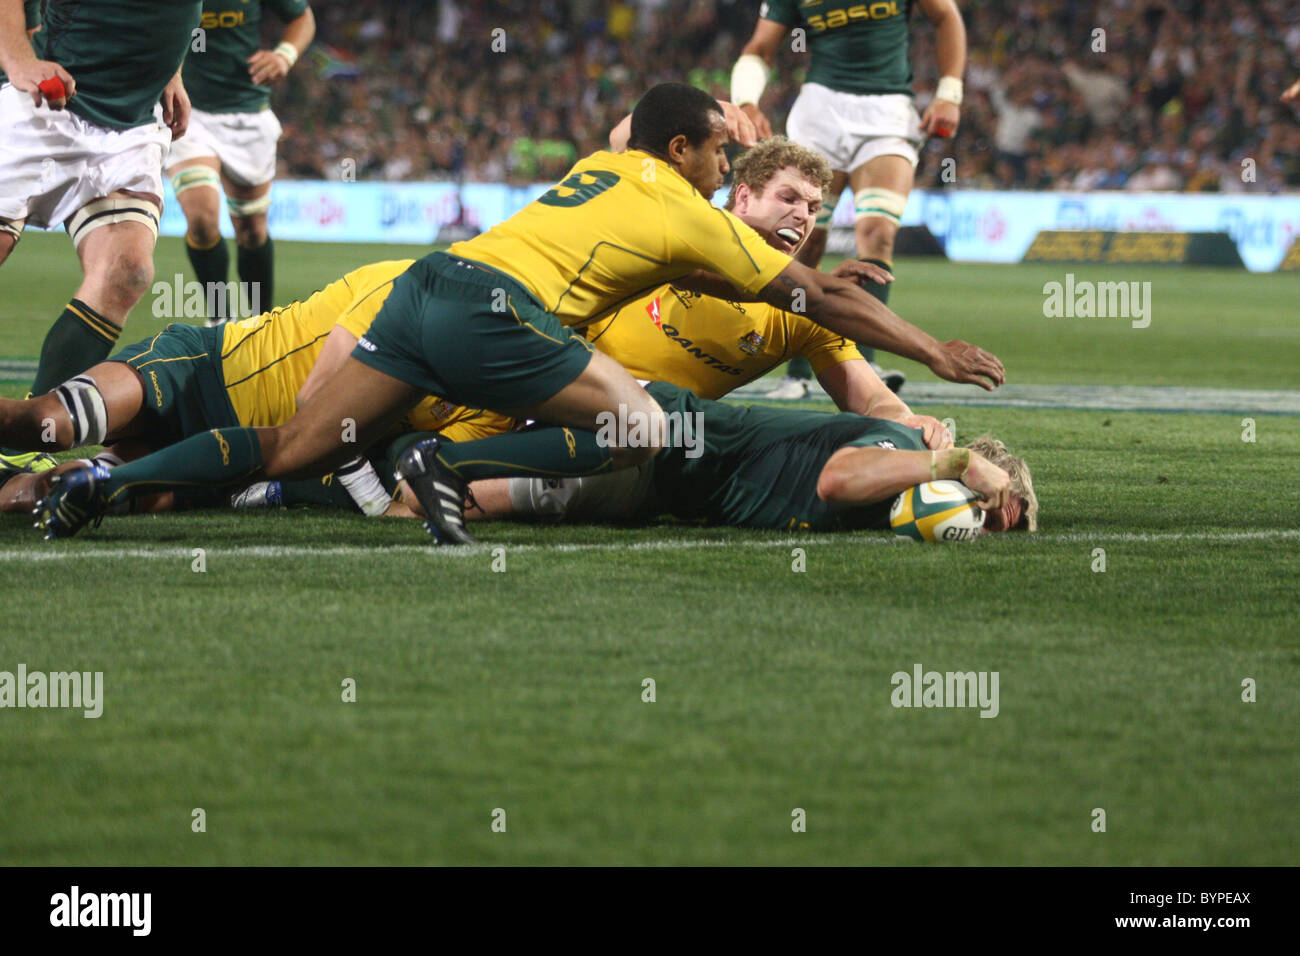 Jean de Villiers scores a try against the Australians at the Tri Nations Match at Bloemfontein, 2010 Stock Photo